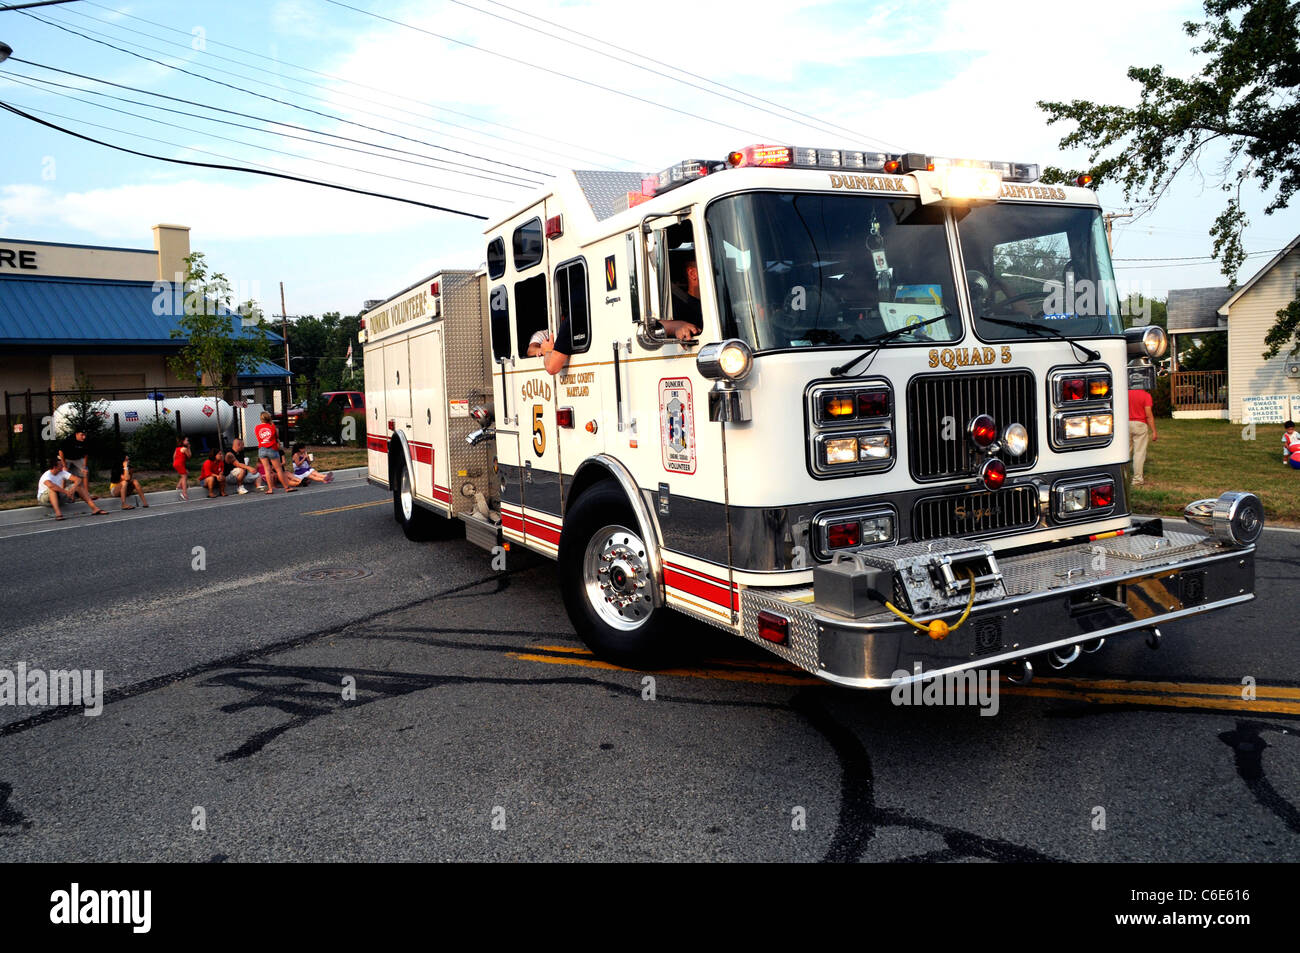 Fire truck  on a emergency call Stock Photo